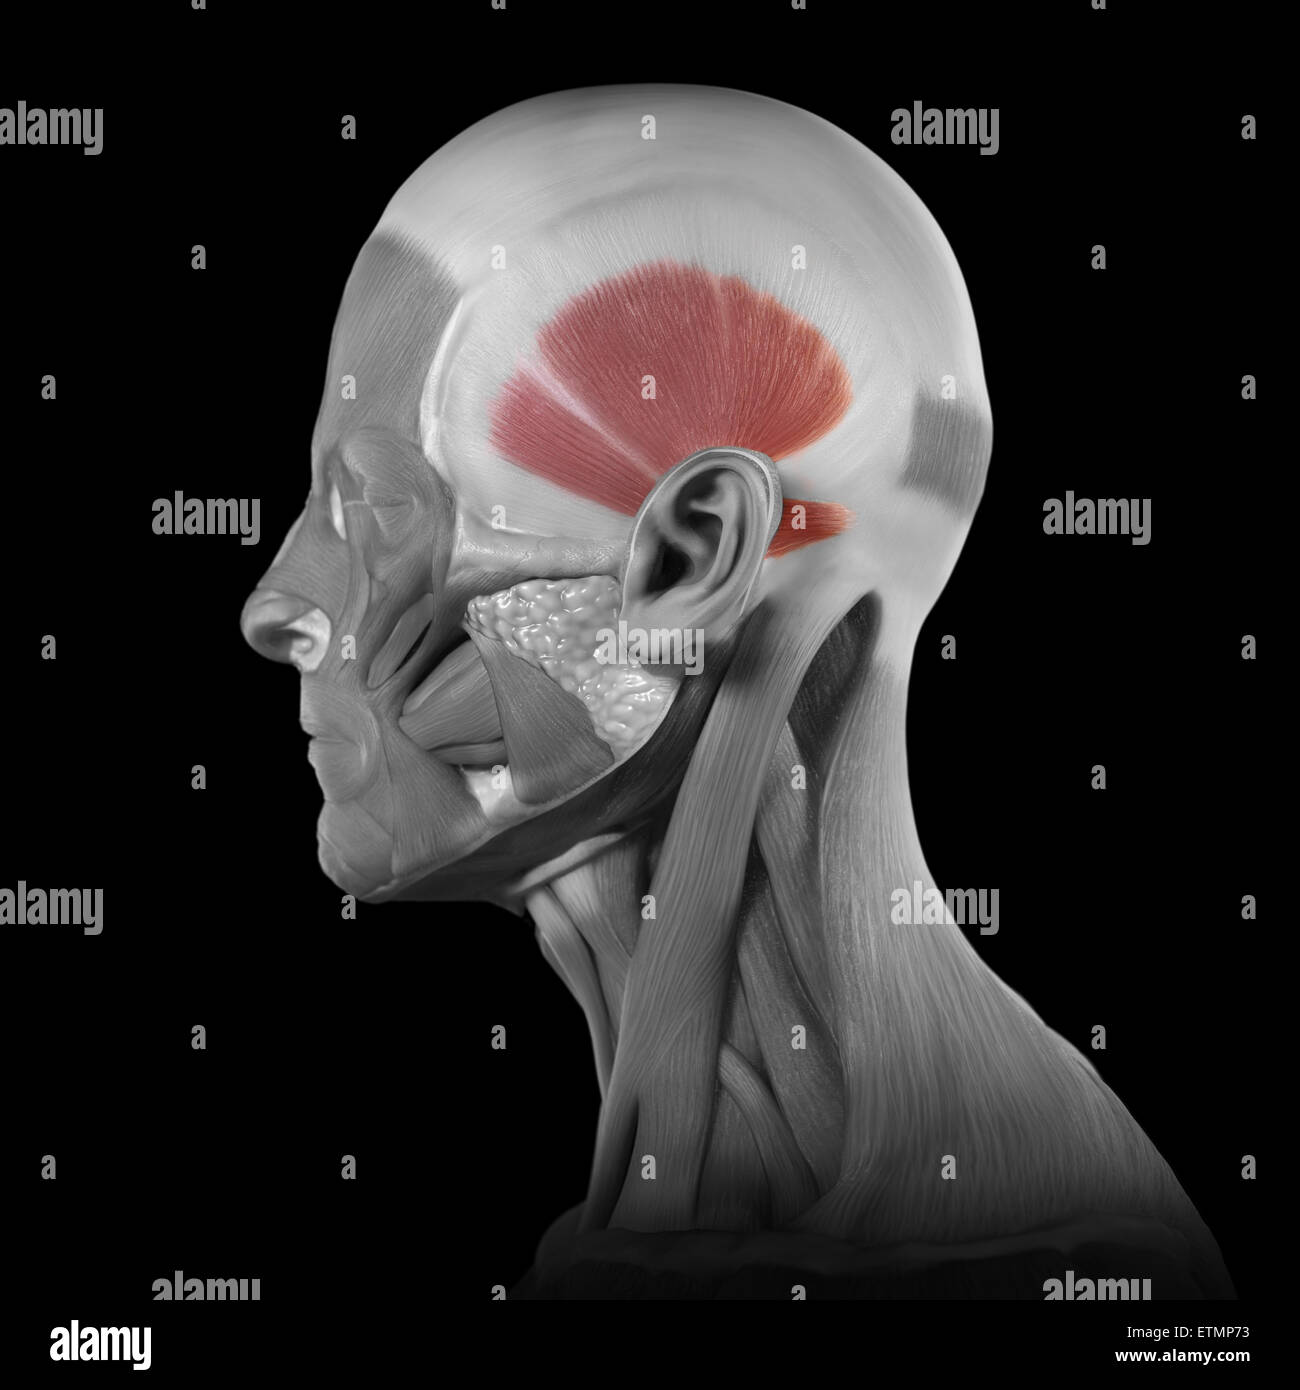 Conceptual image of the muscles of the face with the temporalis muscles highlighted. Stock Photo